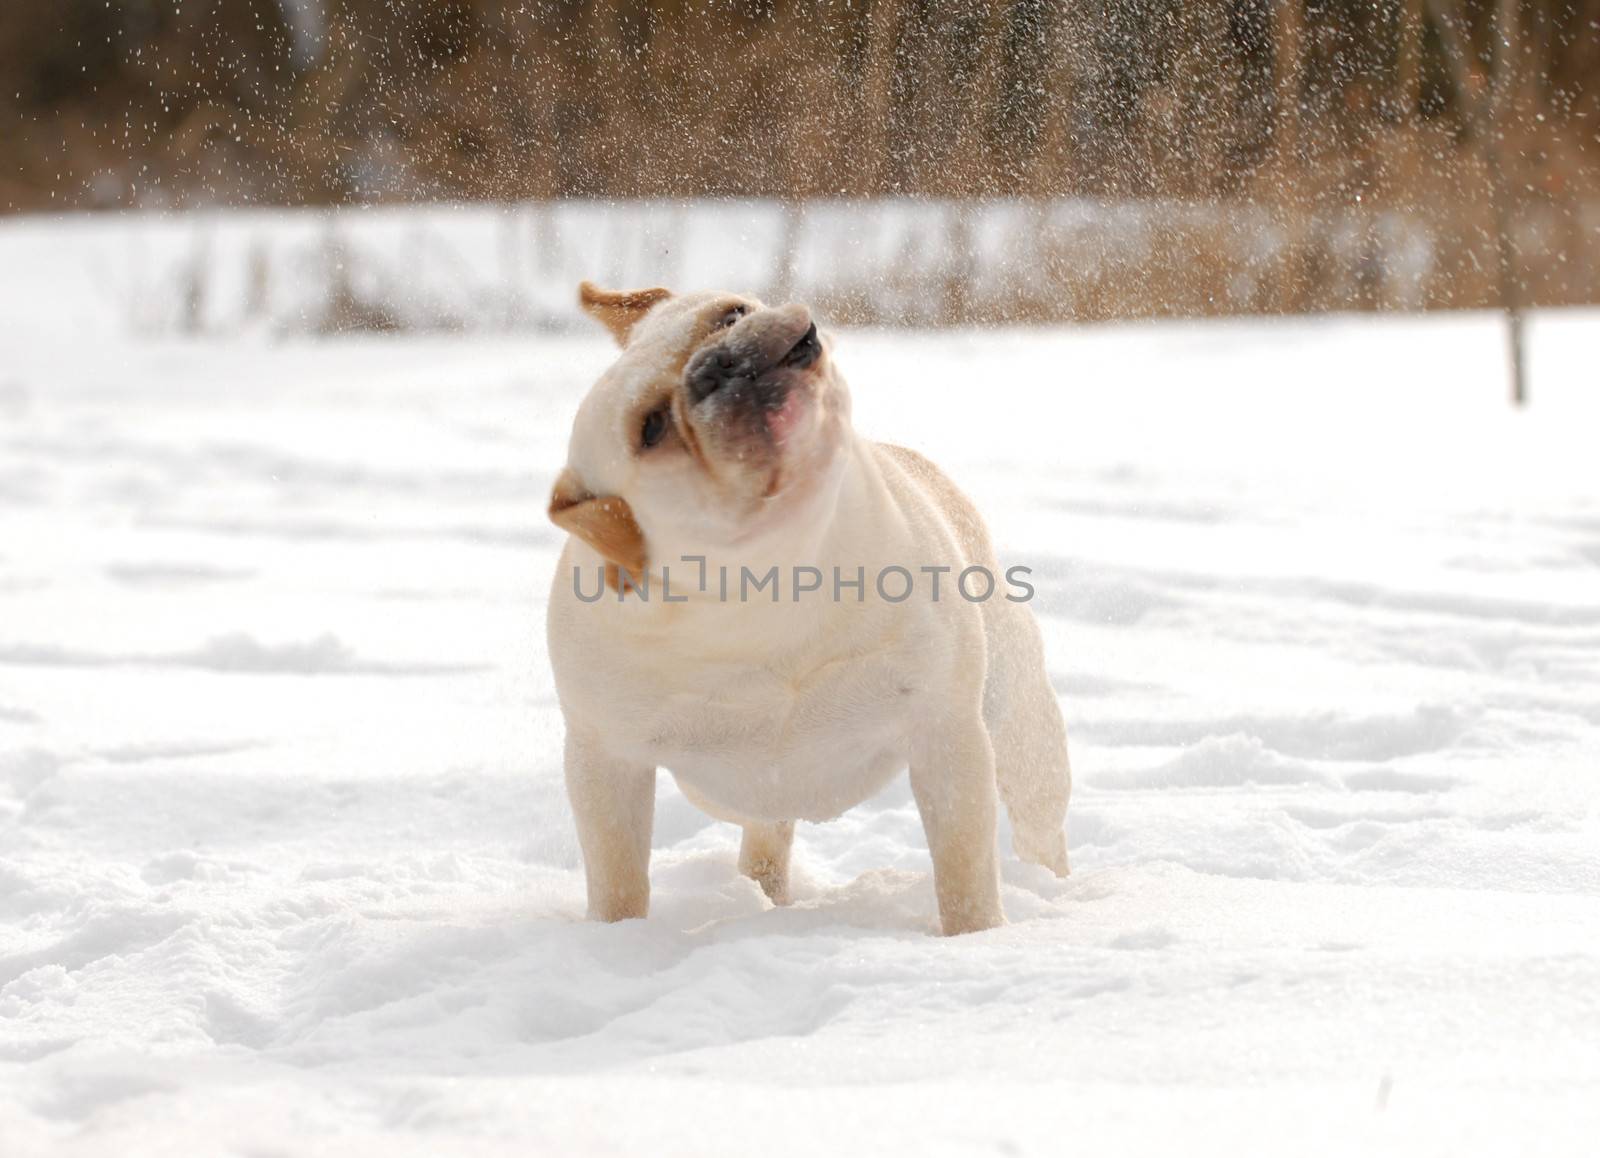 dog shaking snow off by willeecole123